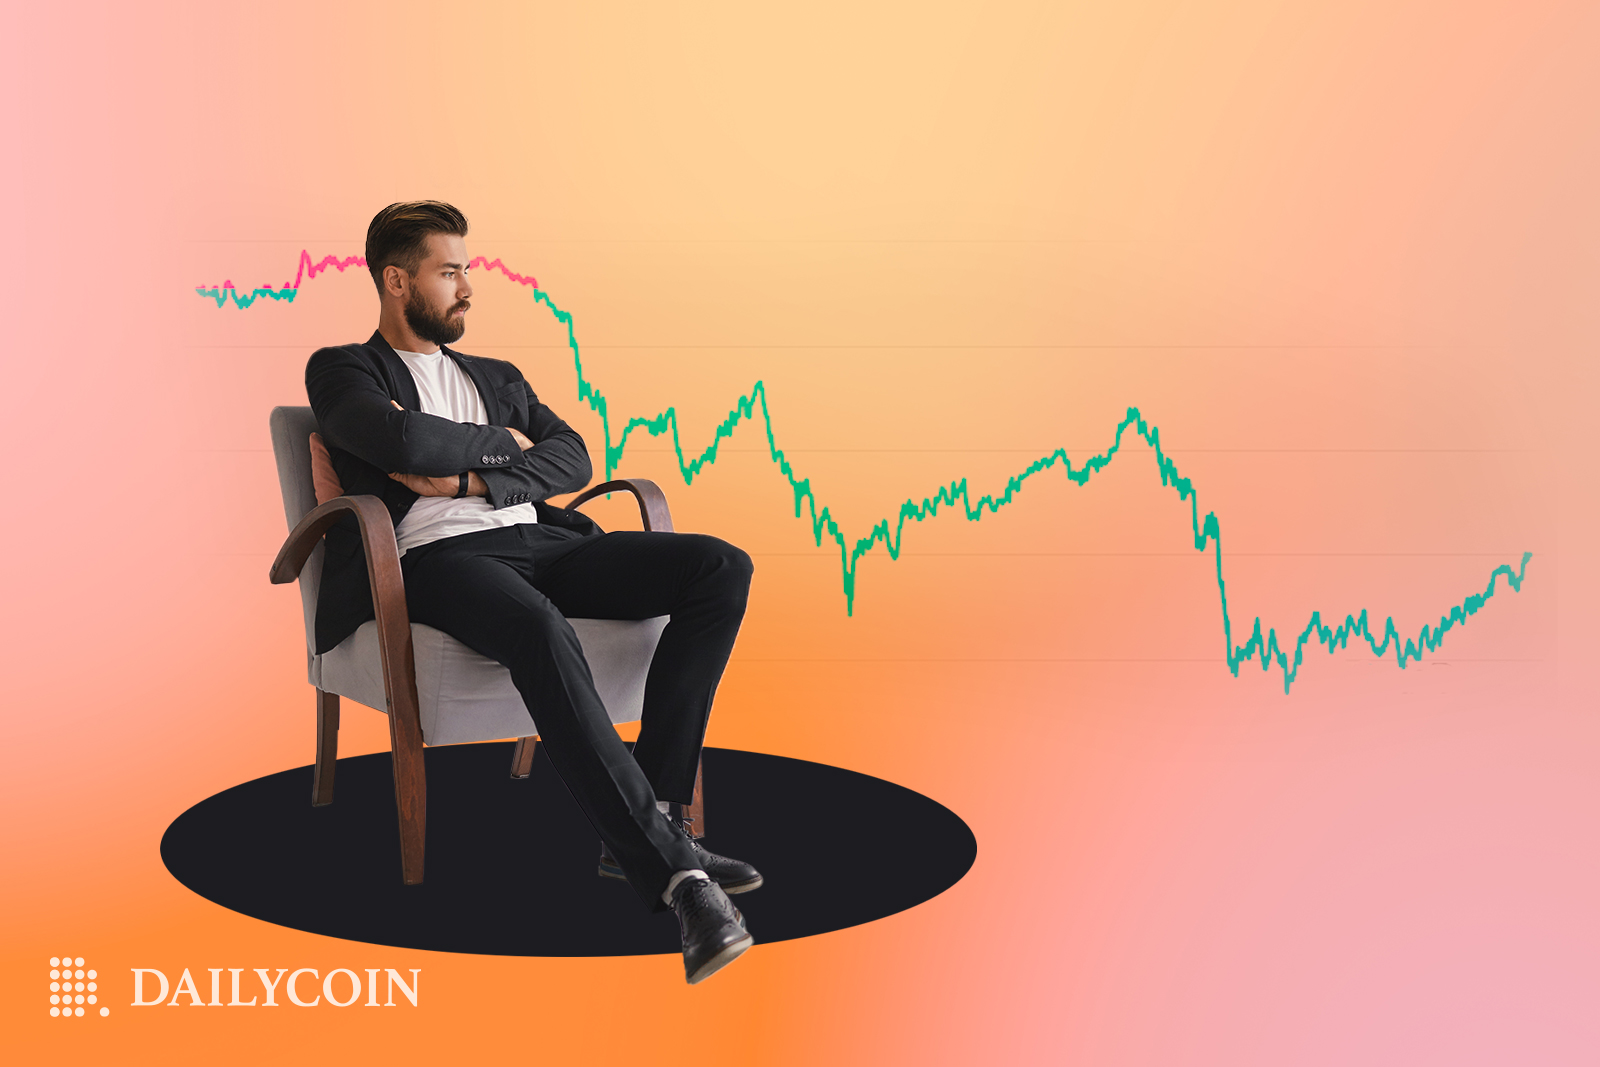 a person sitting on a chair with a bored expression with a XRP chart in a declining trend in the background.